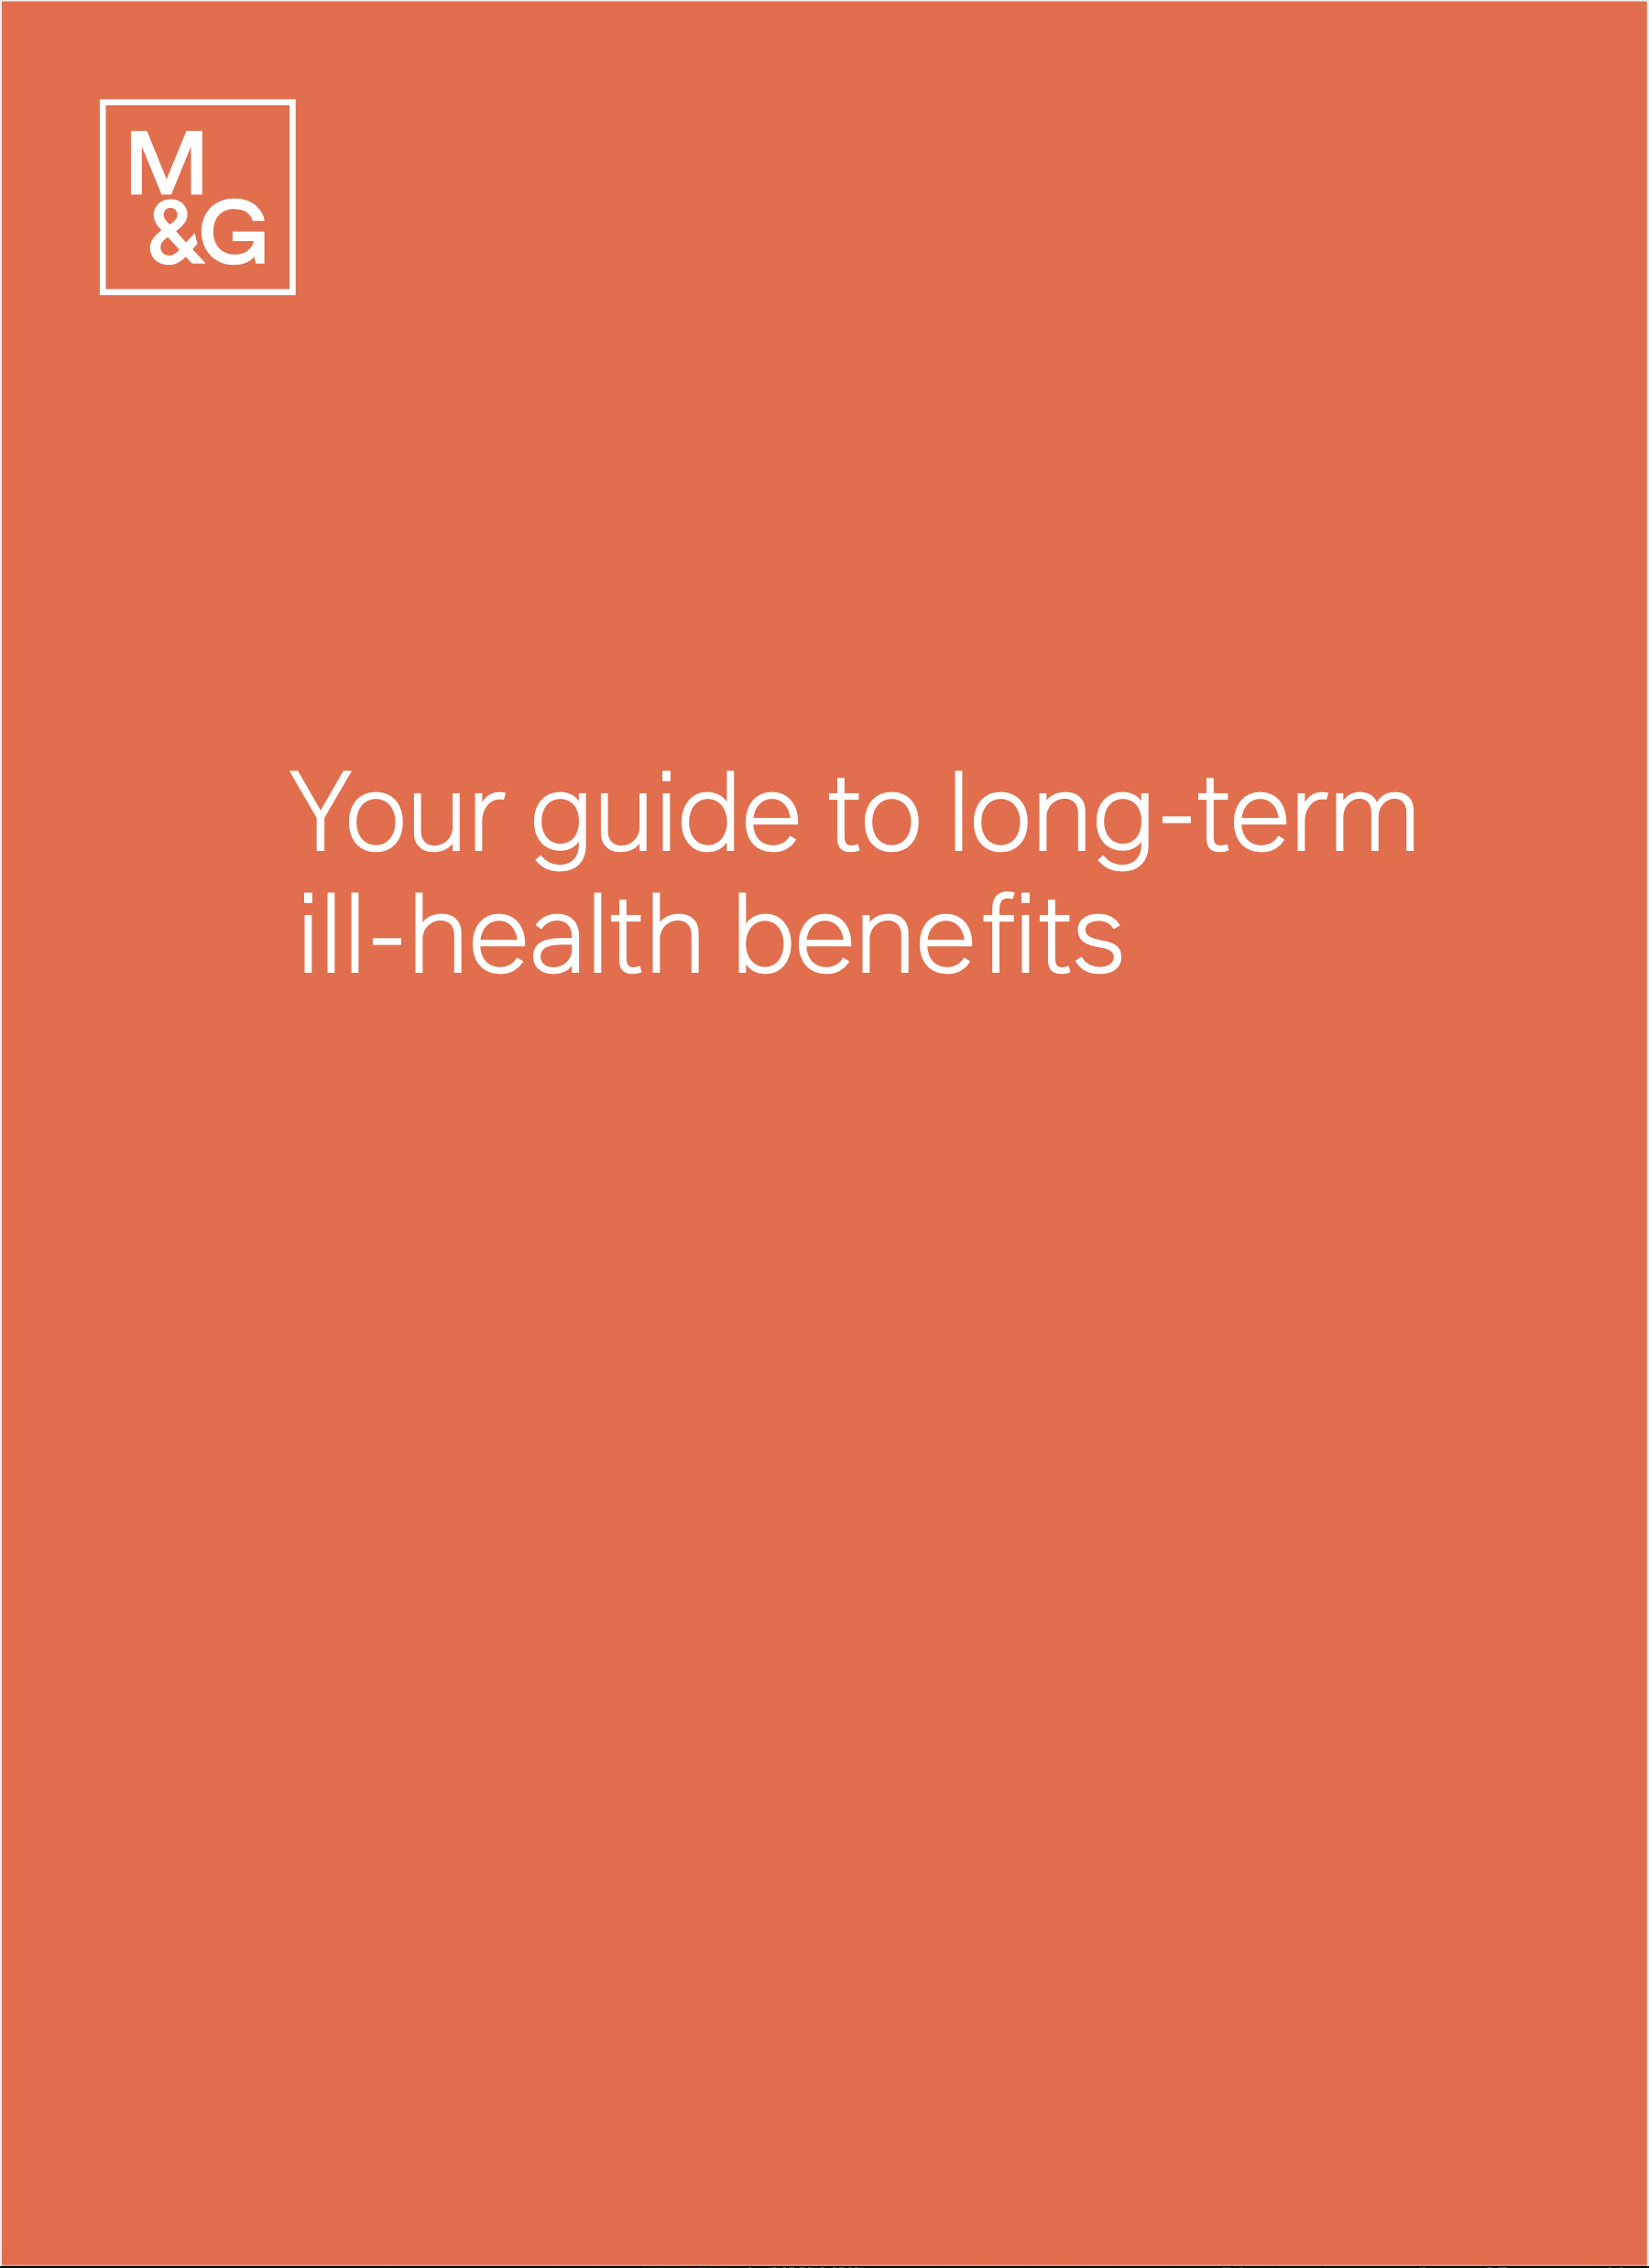 Your guide to Long-term ill-health benefits